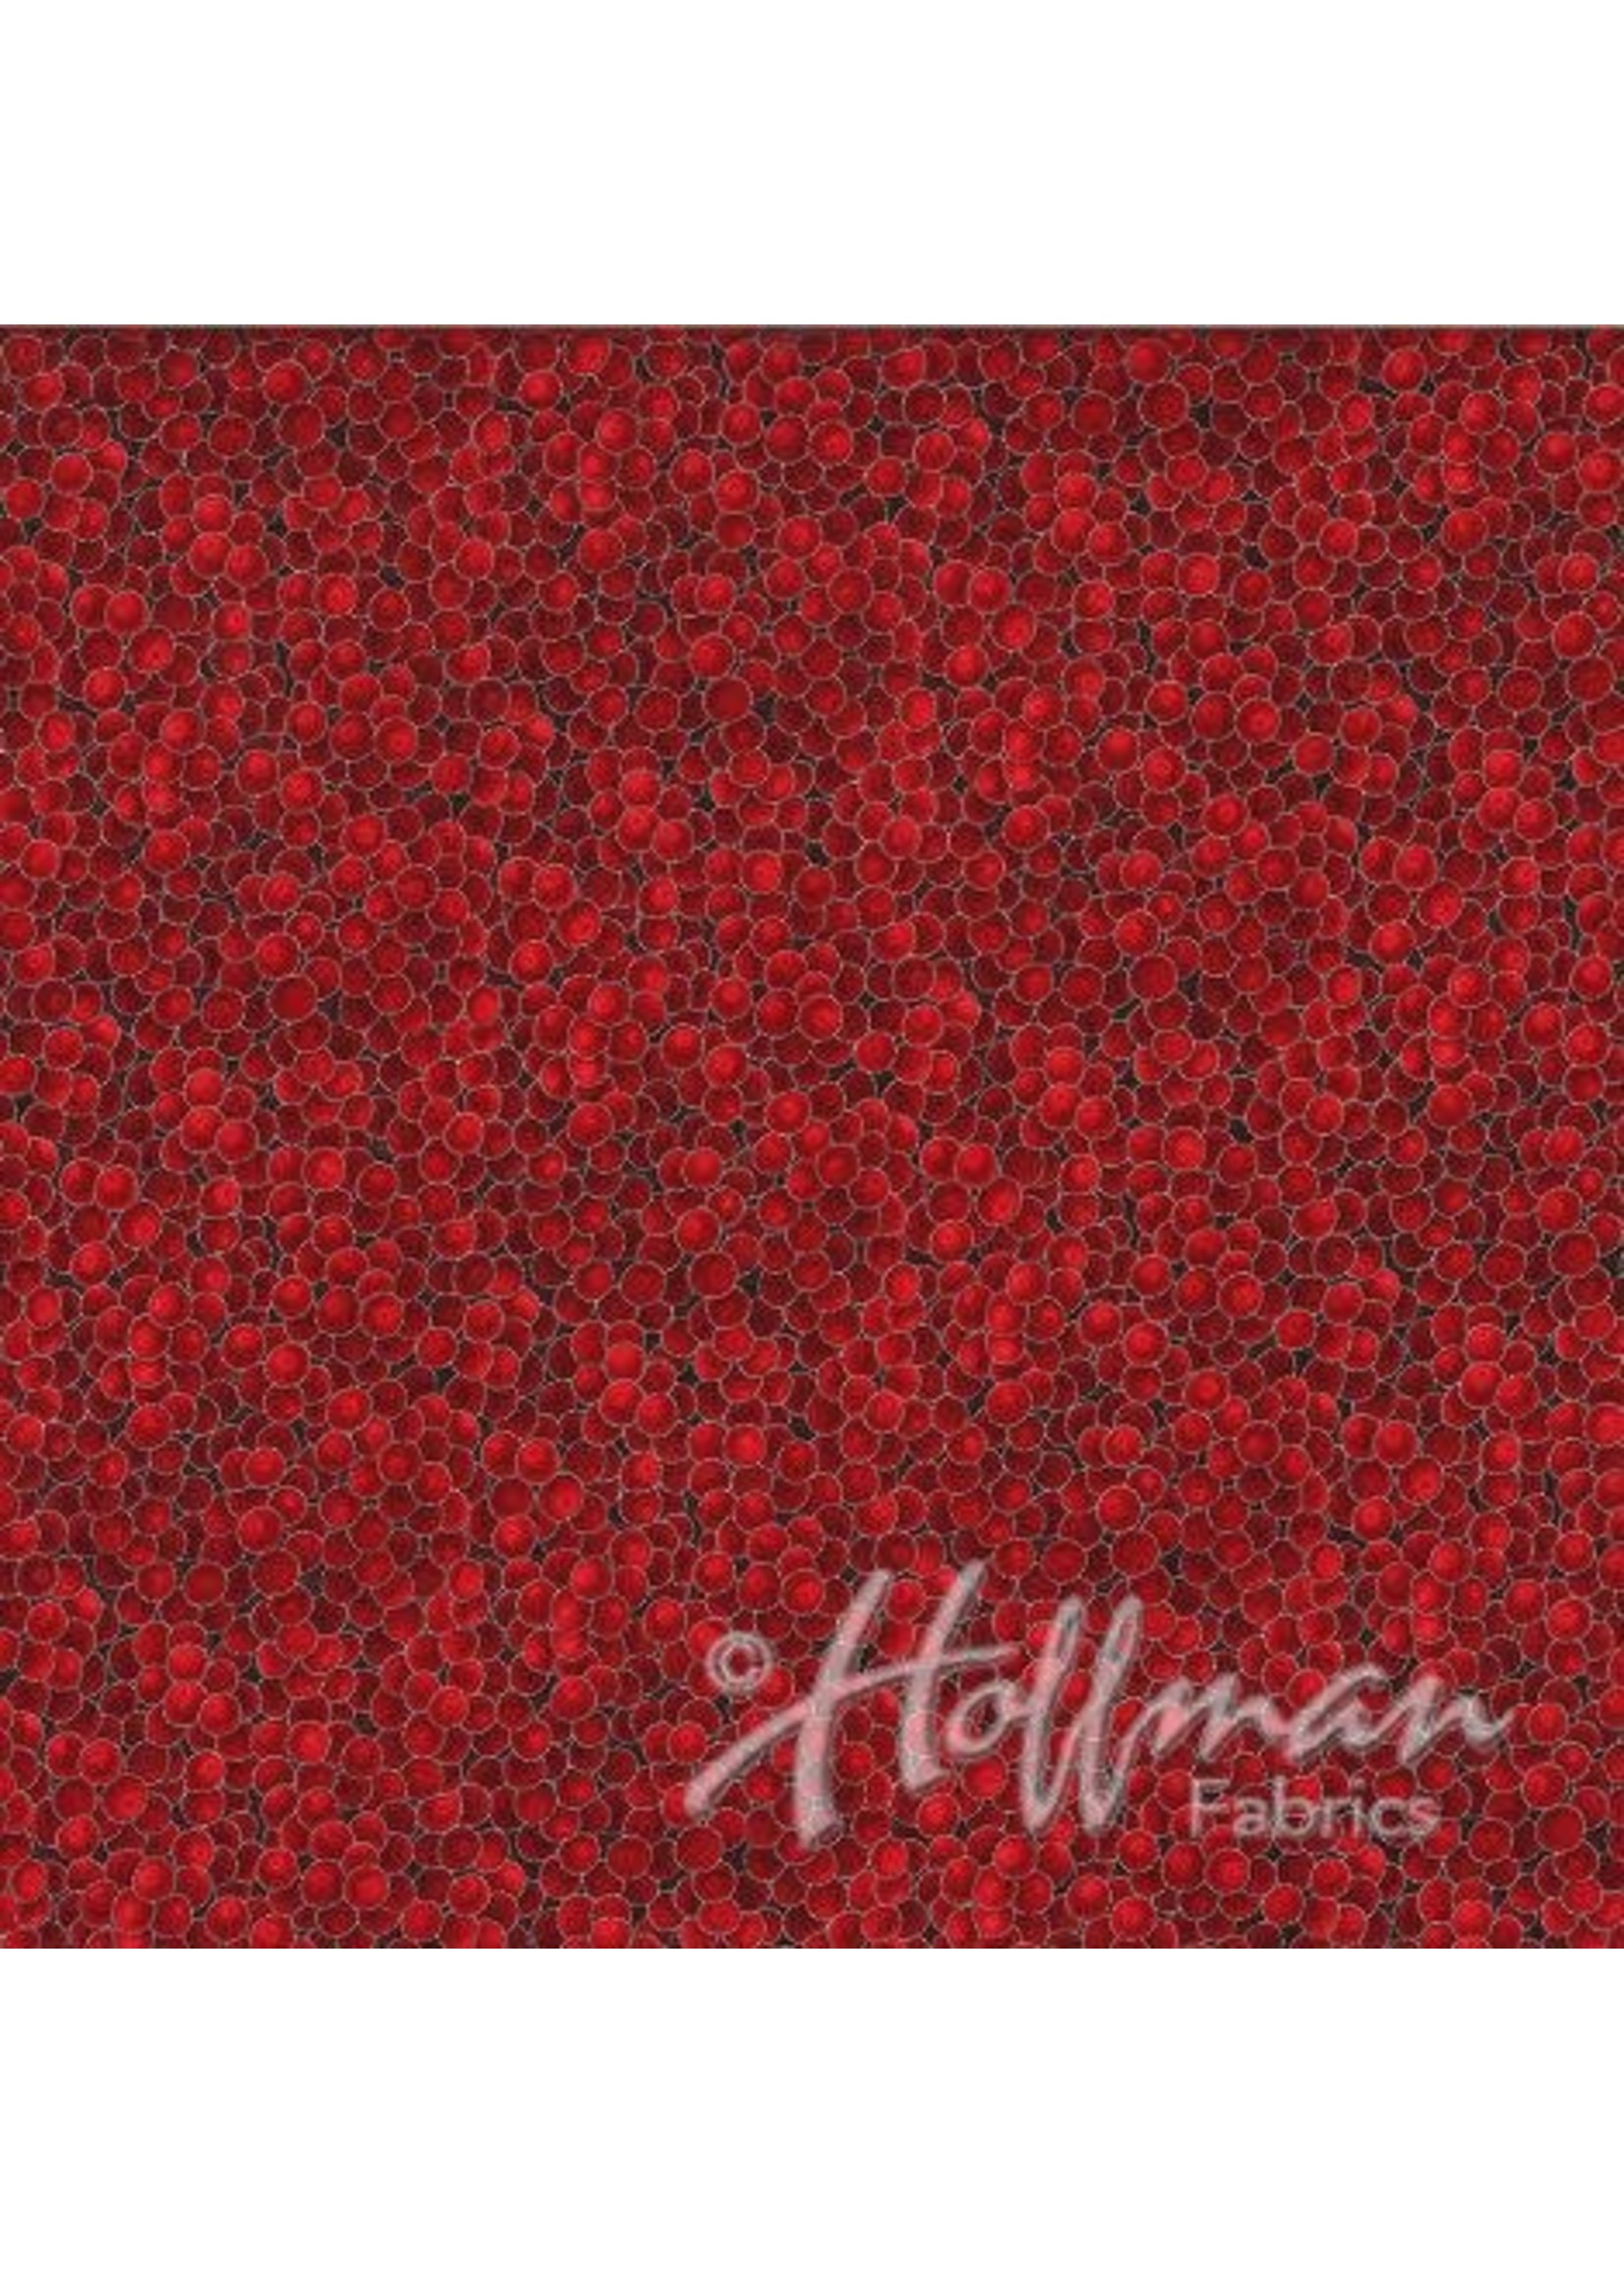 Hoffman Fabrics Holiday Blenders - Red Silver - G85565S - 5S